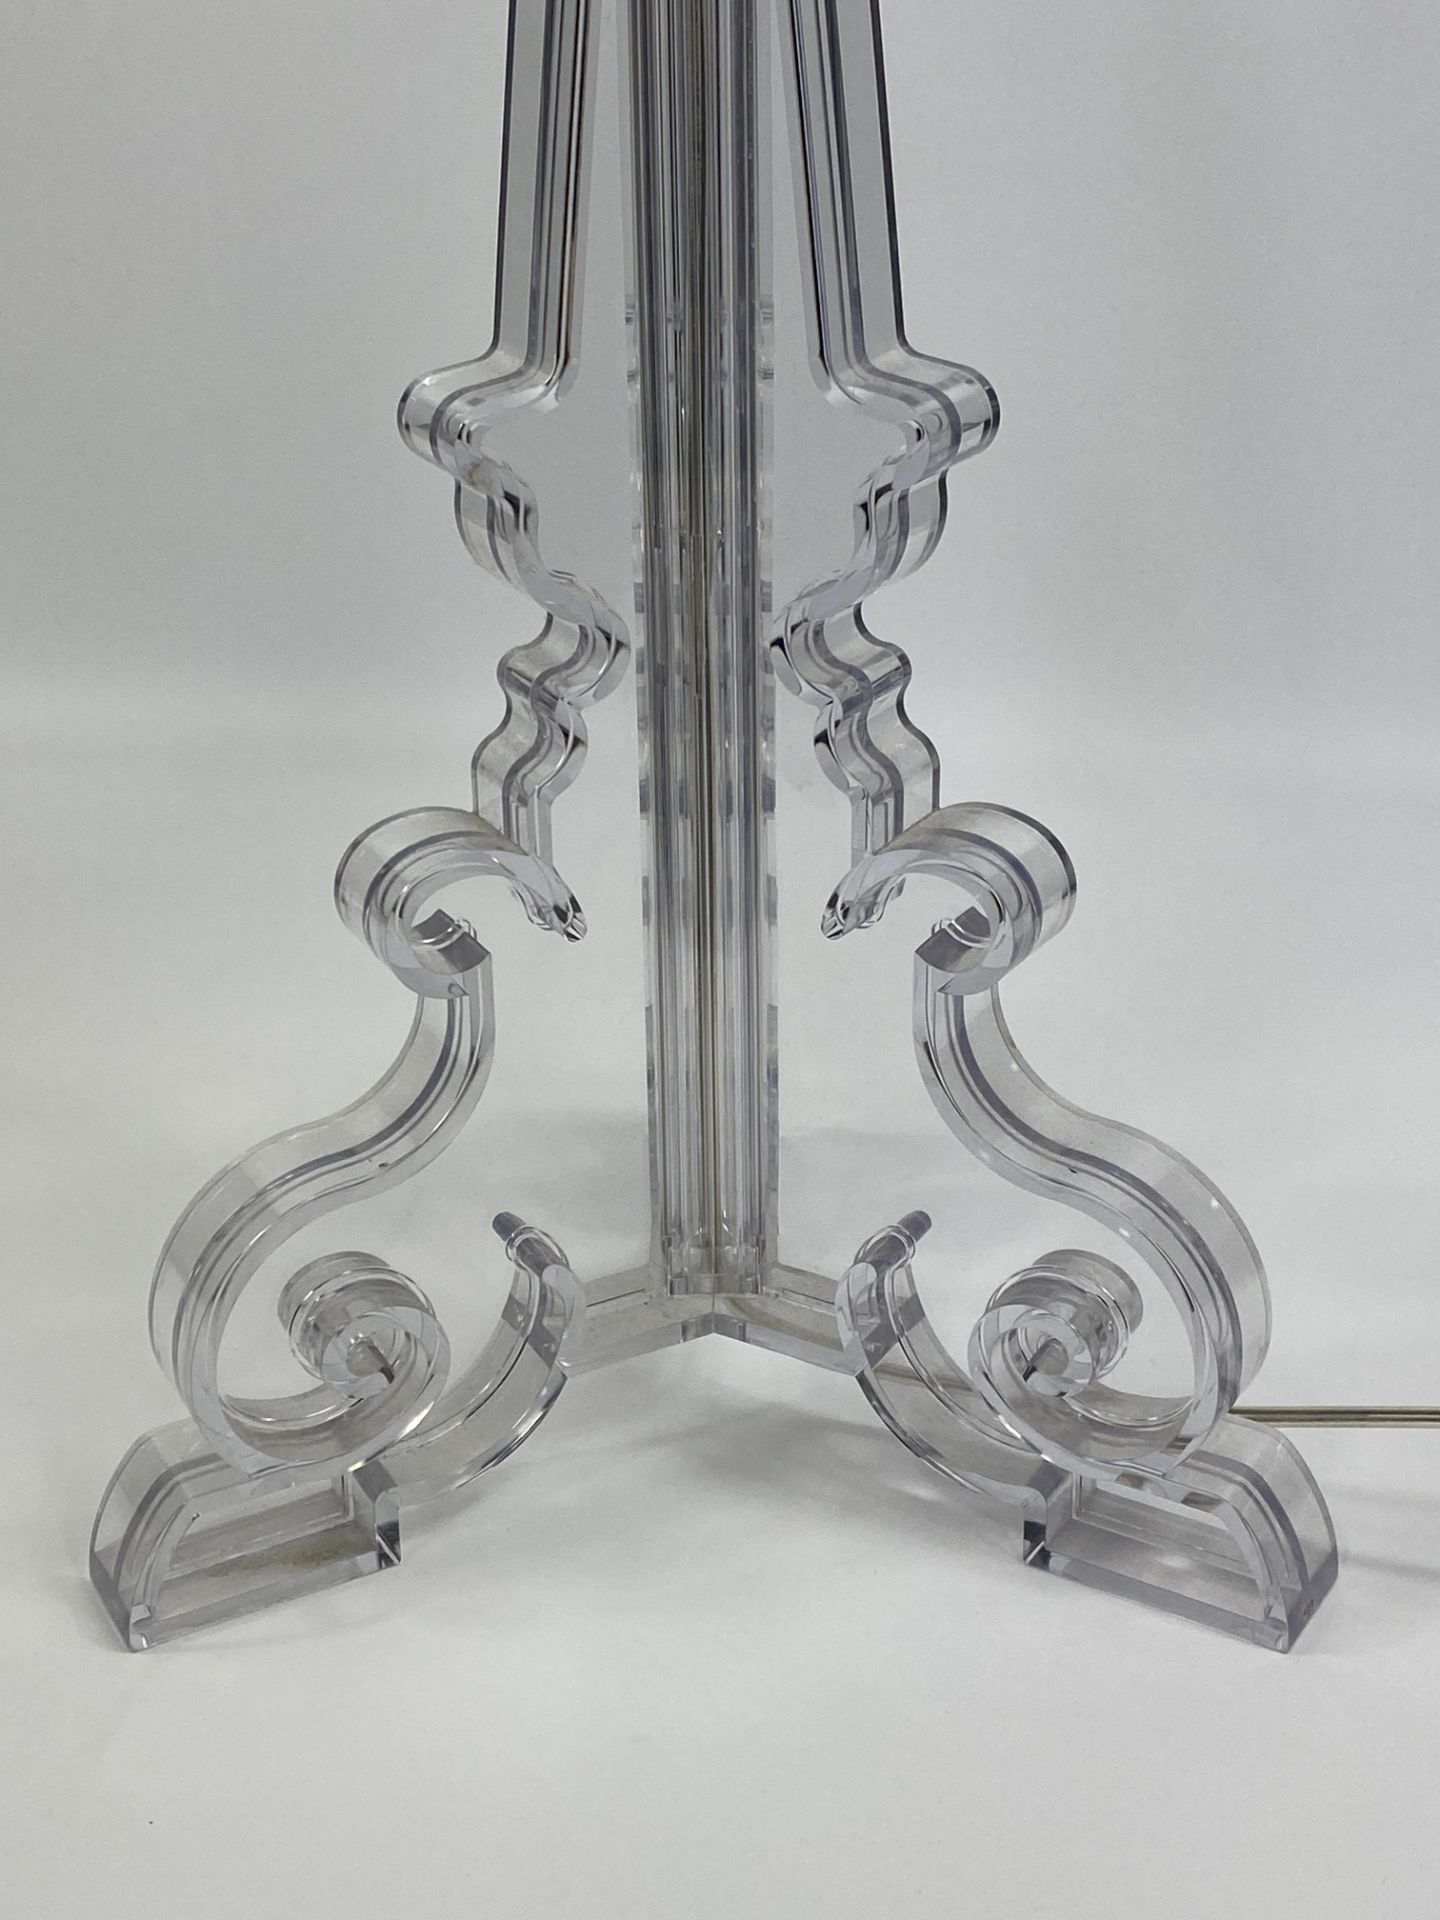 Kartell Bourgie table lamp - Image 3 of 5